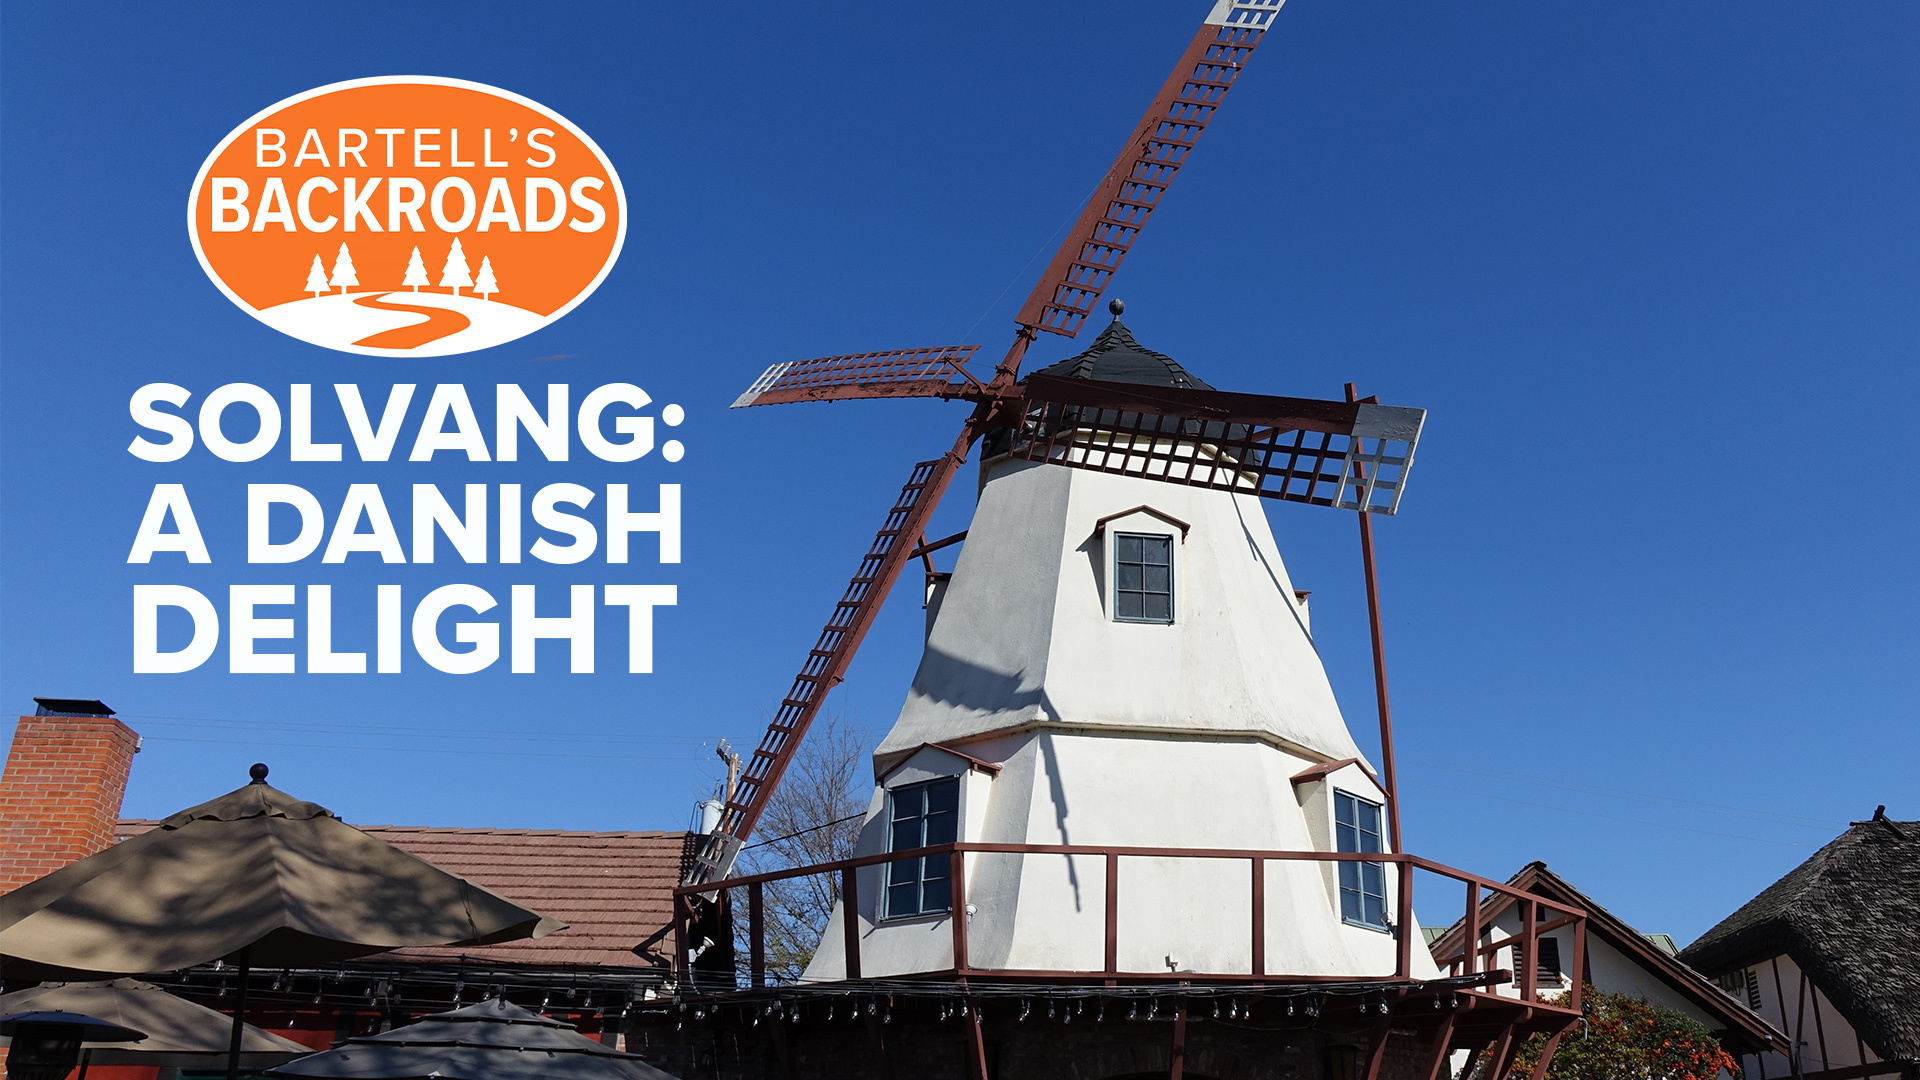 Just 35 miles from Santa Barbara, Solvang is a throwback to historic Denmark. Recorded pre-pandemic.